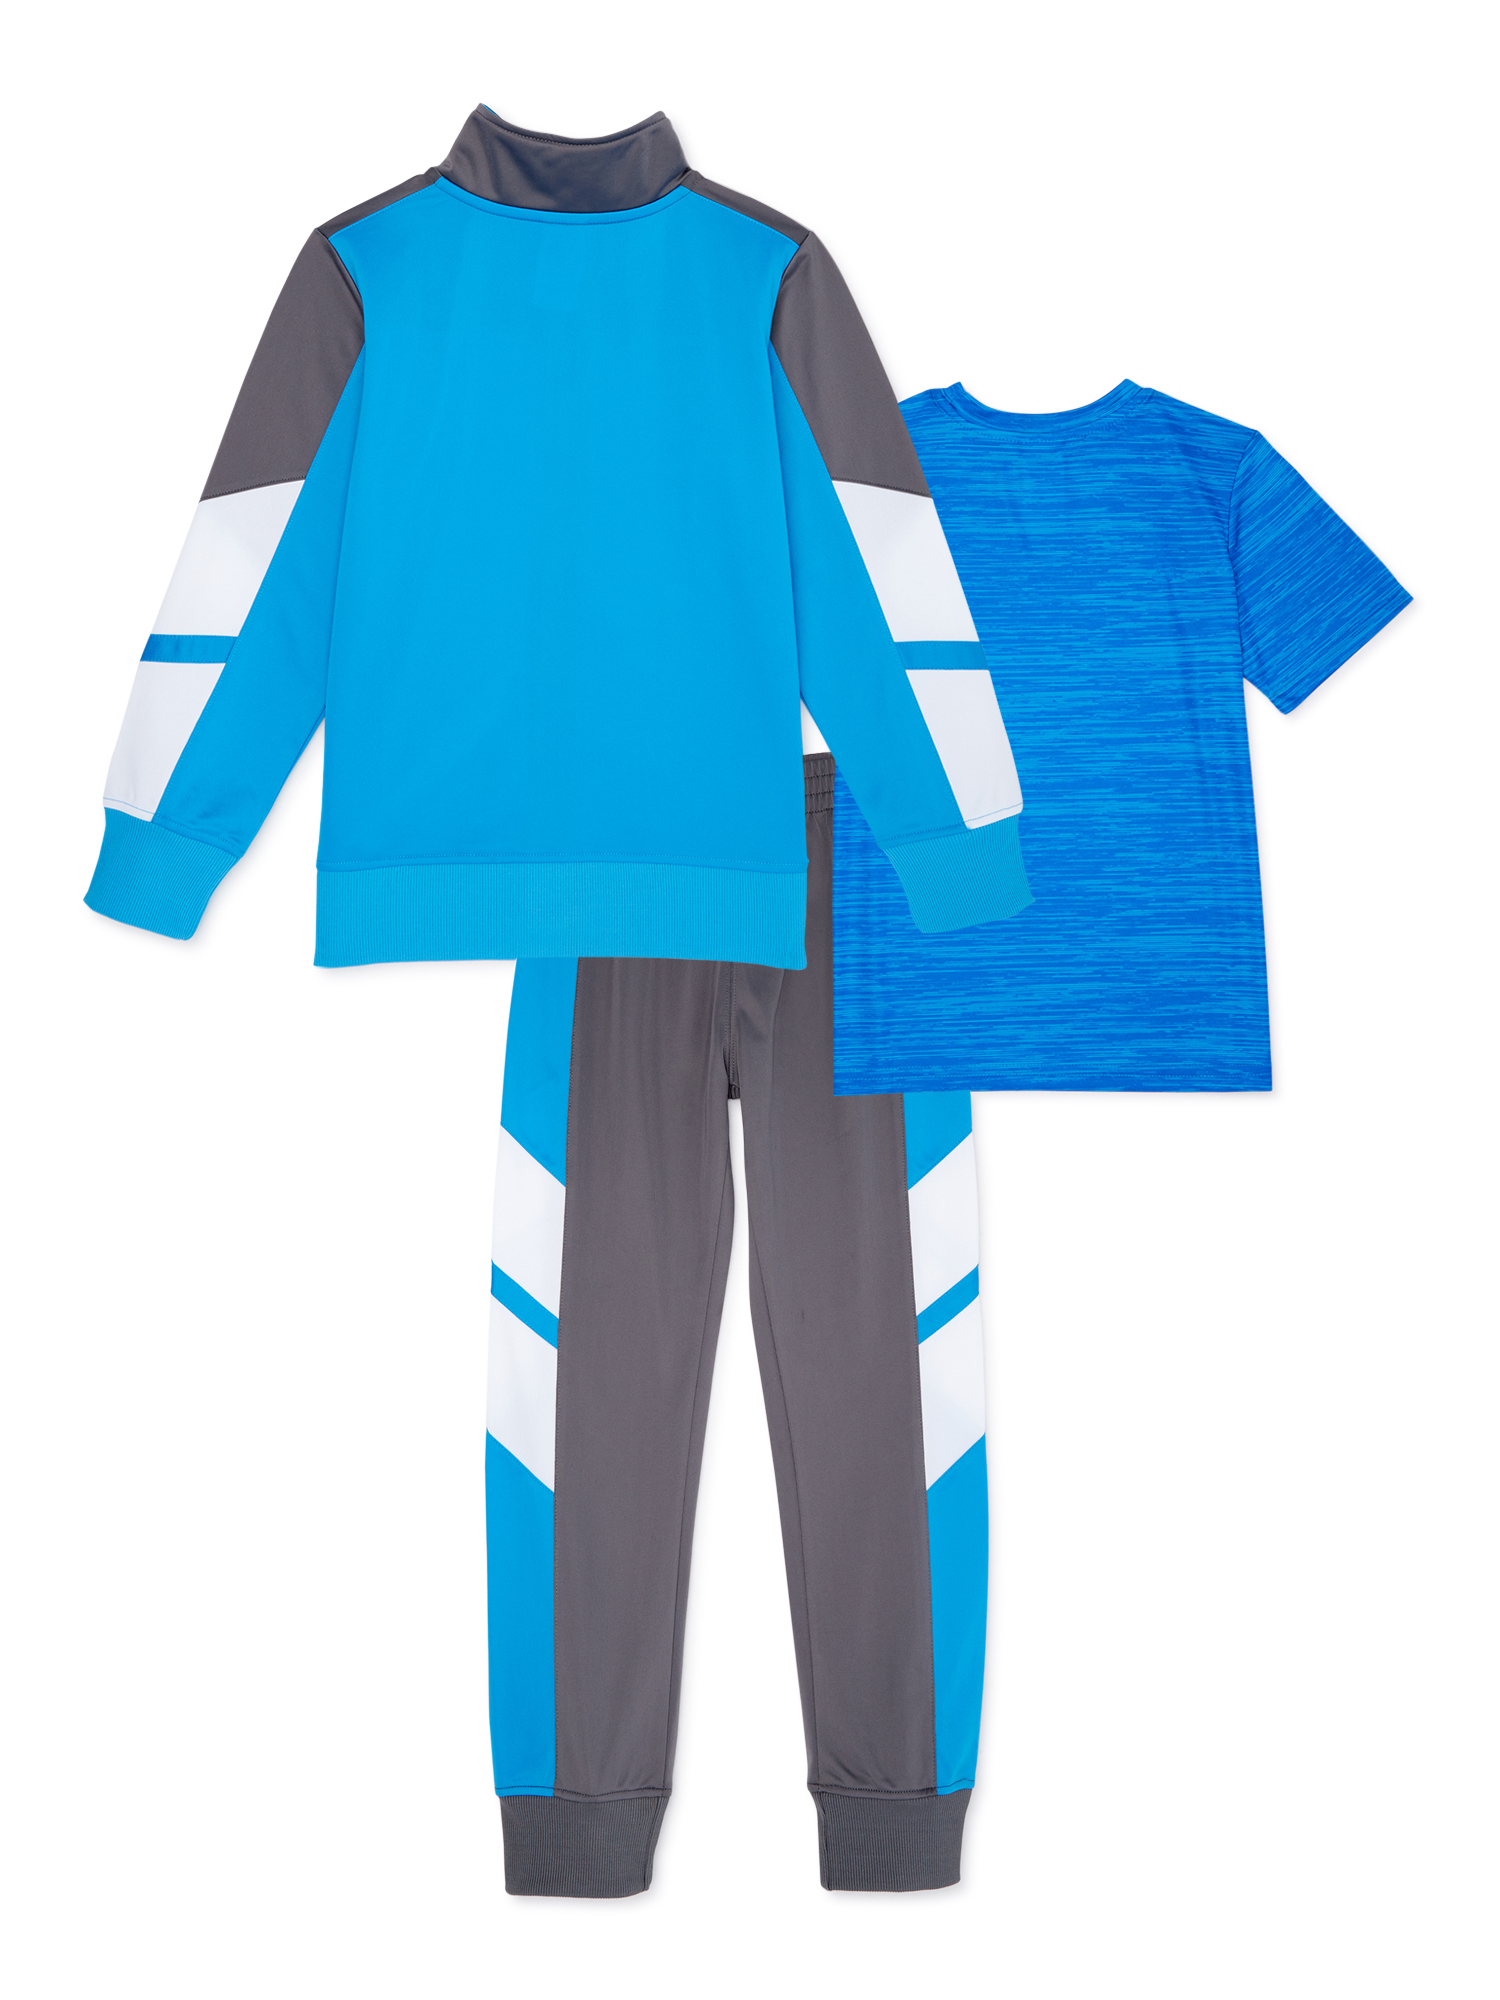 Cheetah Boys Tricot Jacket, Joggers and Performance T-Shirt, 3-Piece Athletic Set, Sizes 2T-18 & Husky - image 4 of 5